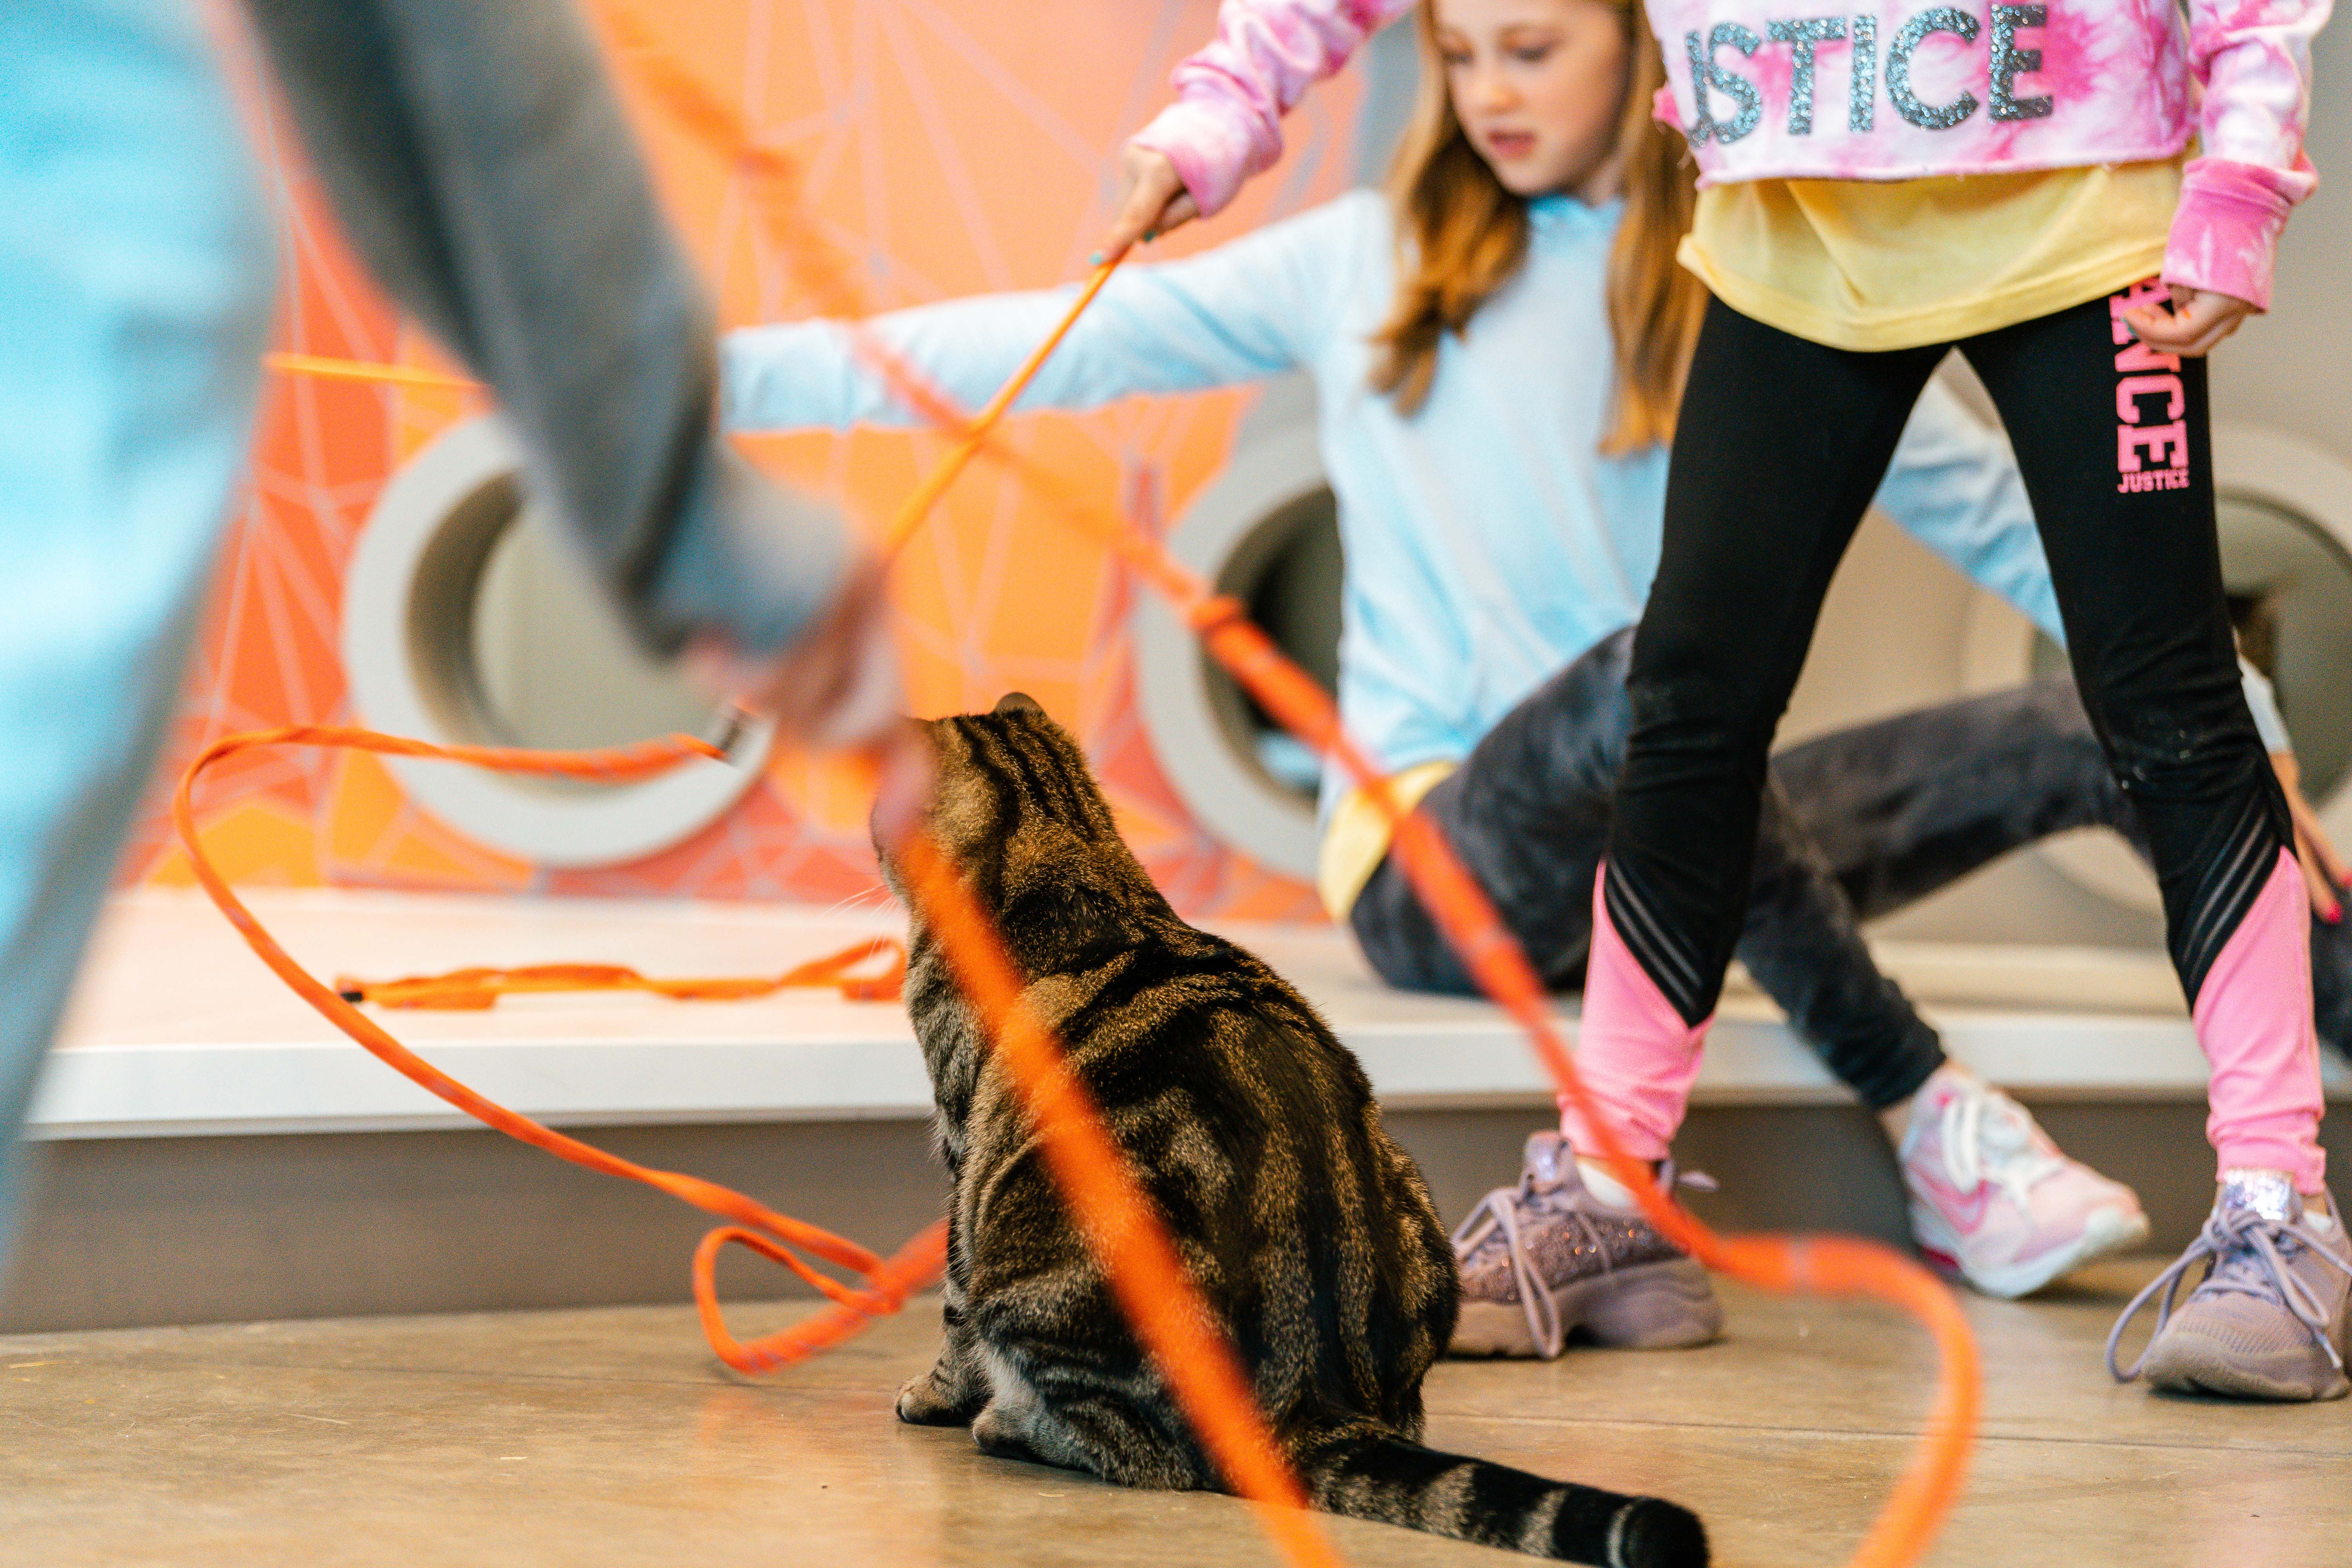 People playing with orange wand toys with a tabby cat